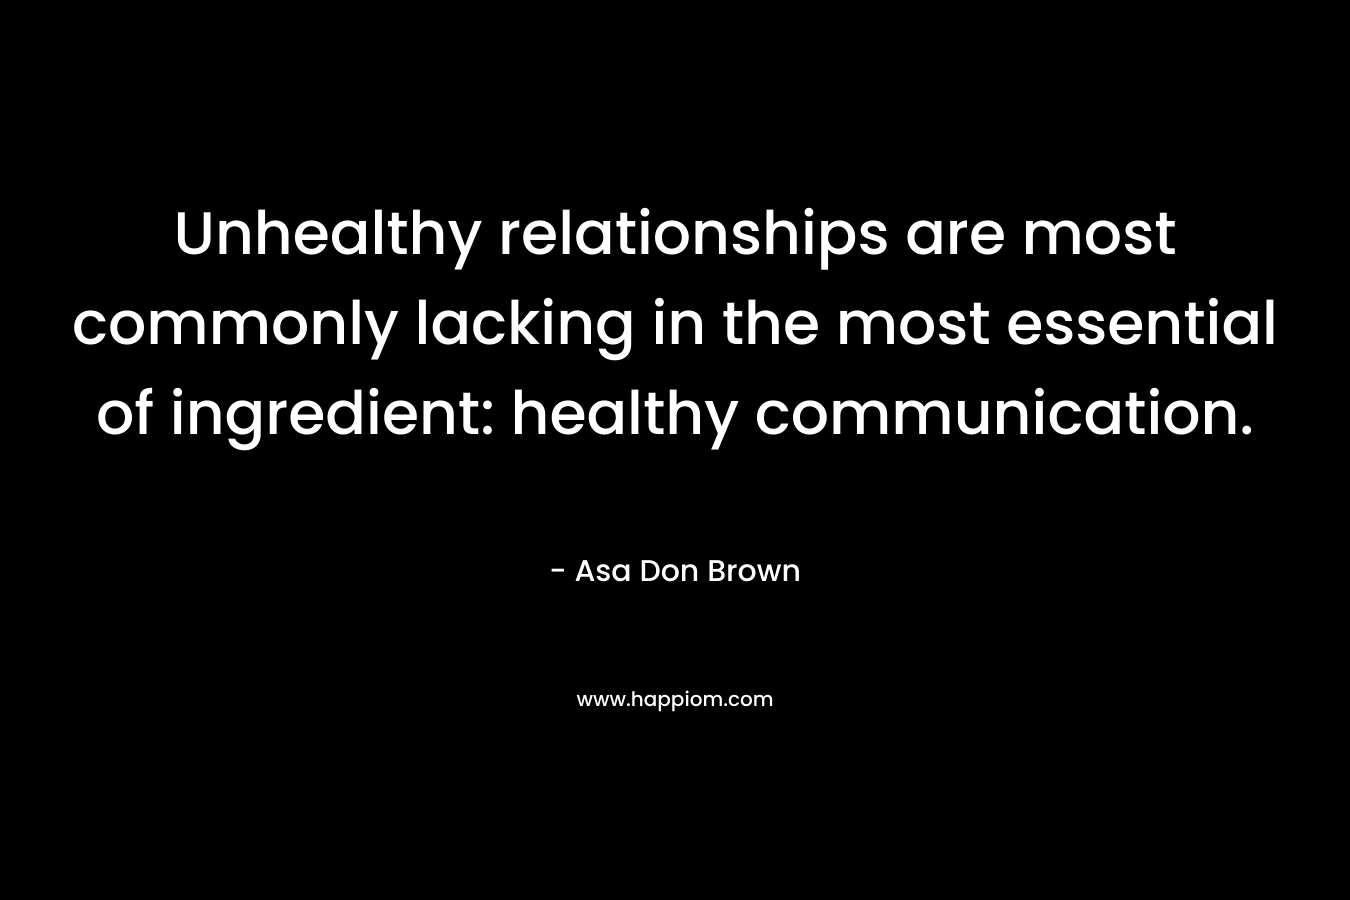 Unhealthy relationships are most commonly lacking in the most essential of ingredient: healthy communication.